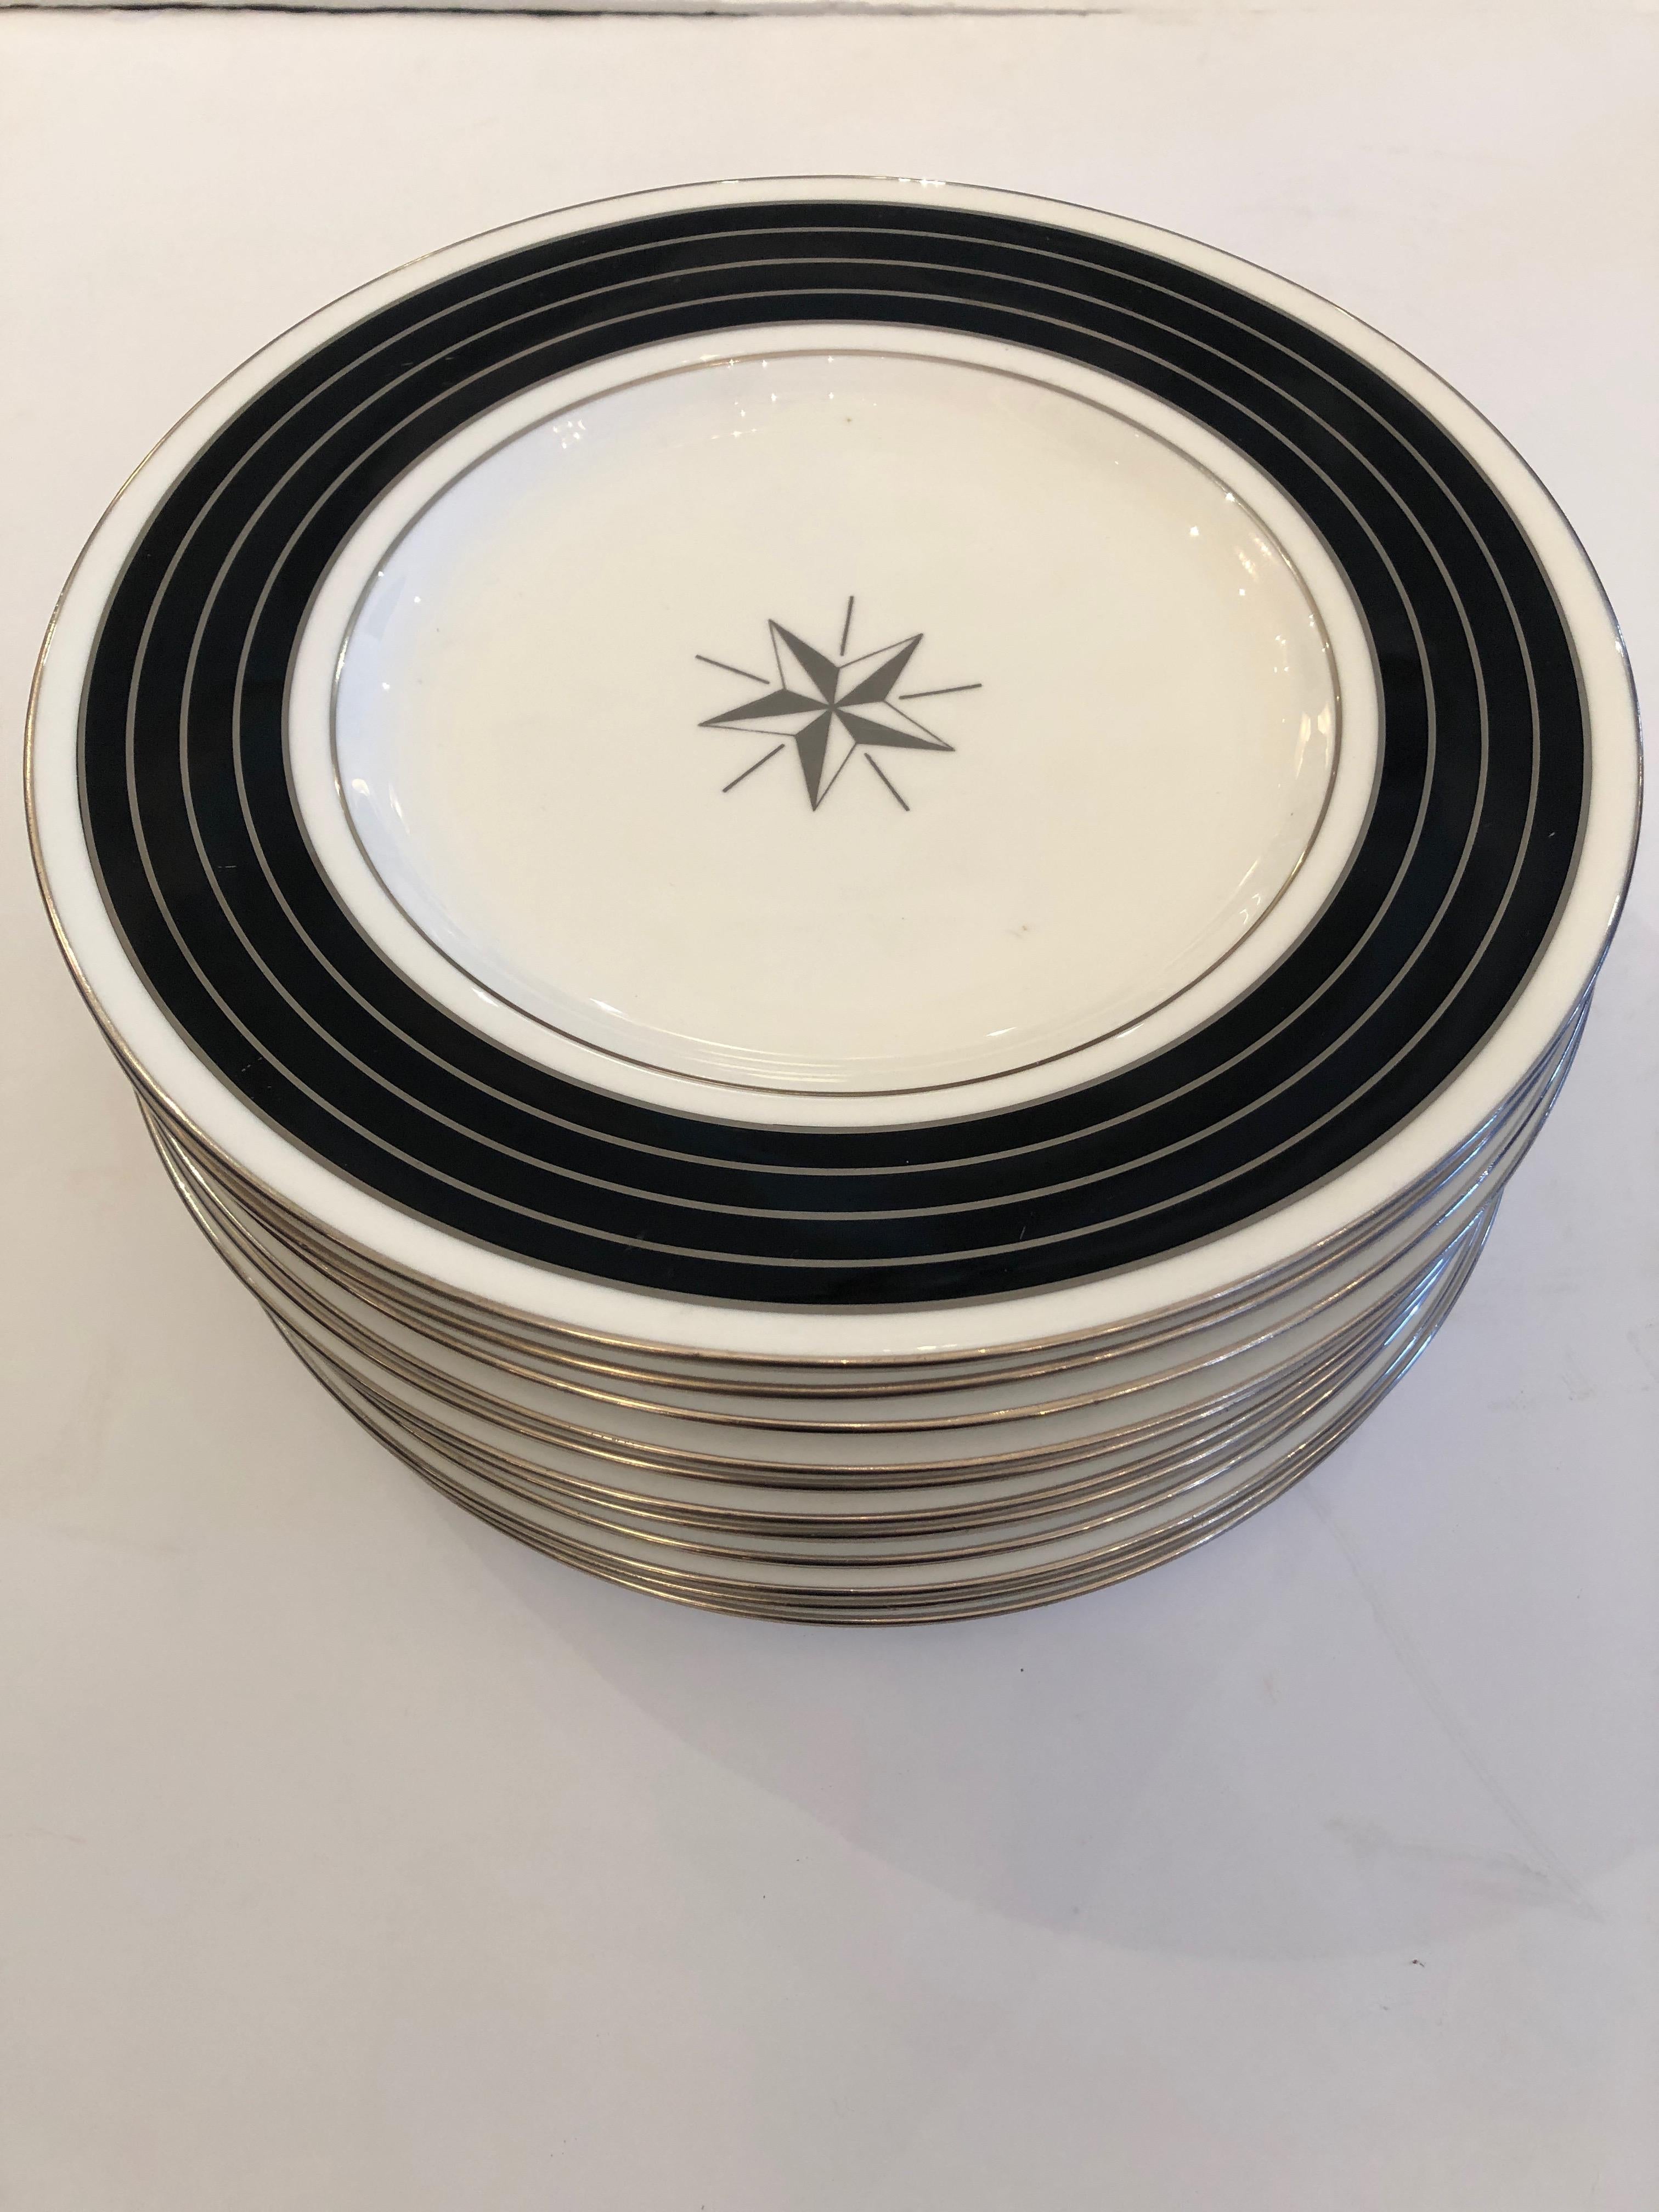 12 handsome Minton china dinner or service plates having contemporary style with black and platinum silver striped borders, white background and a central star decoration.